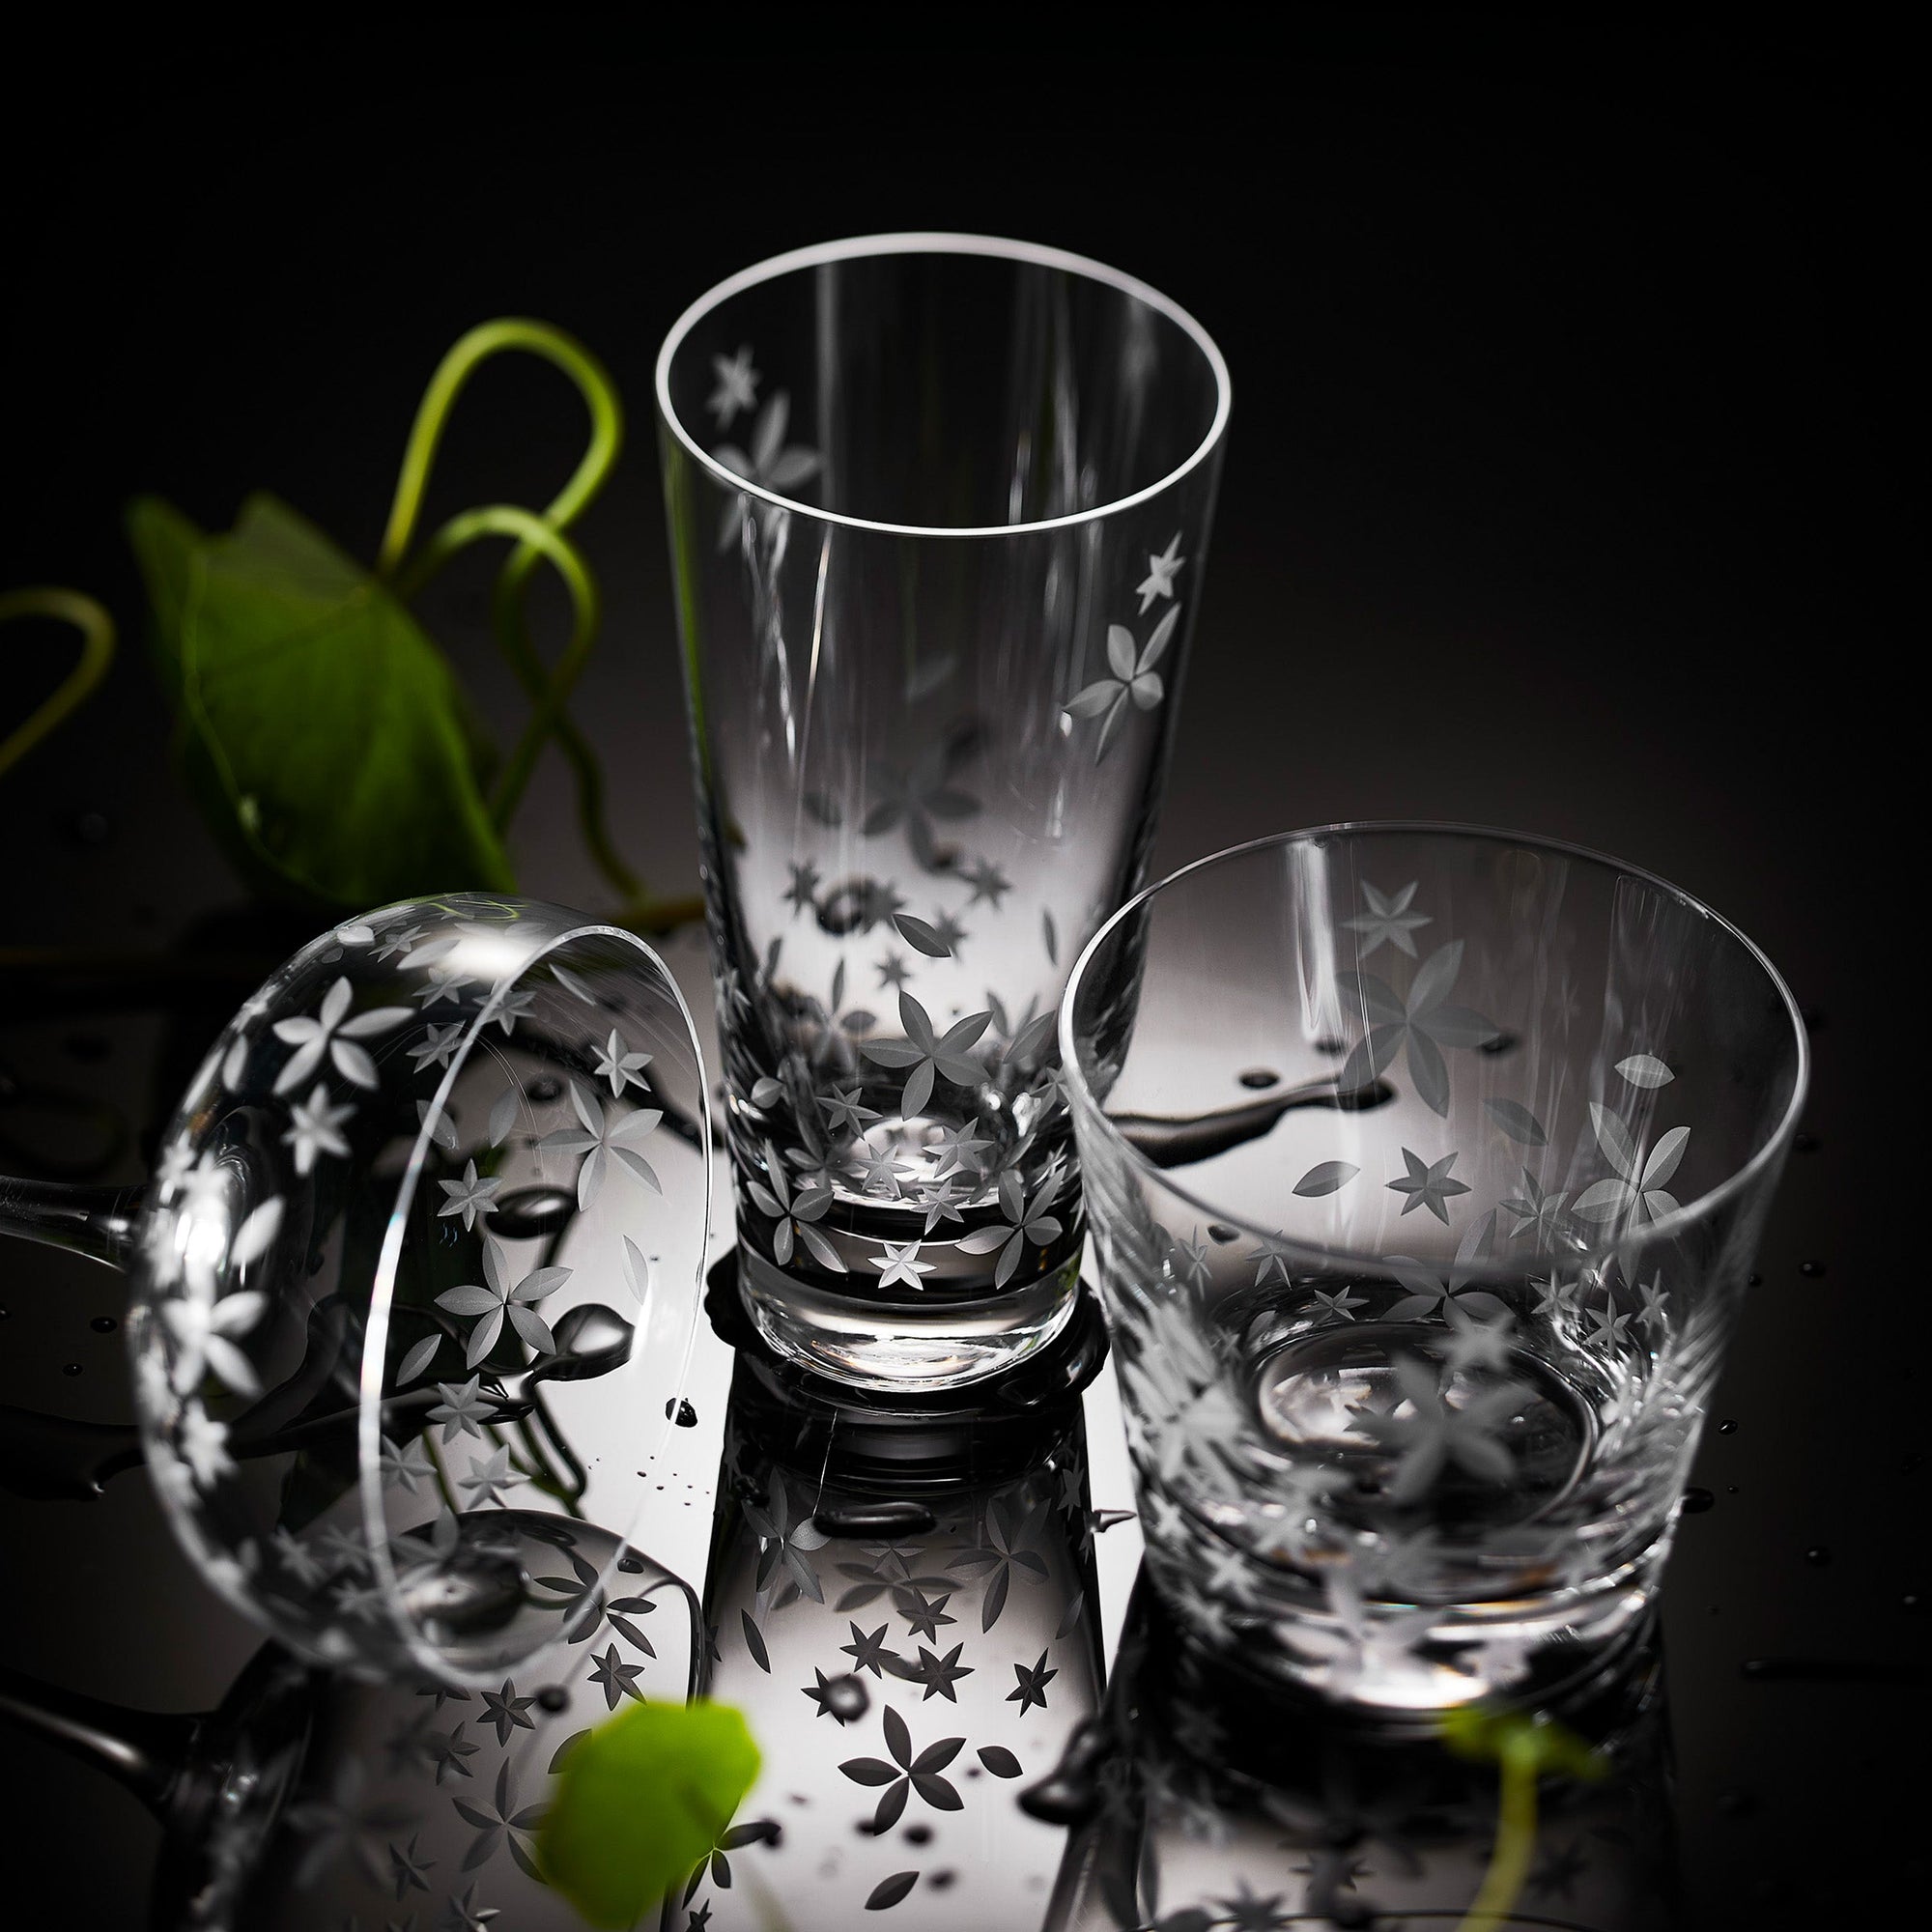 A group of glasses on a table.